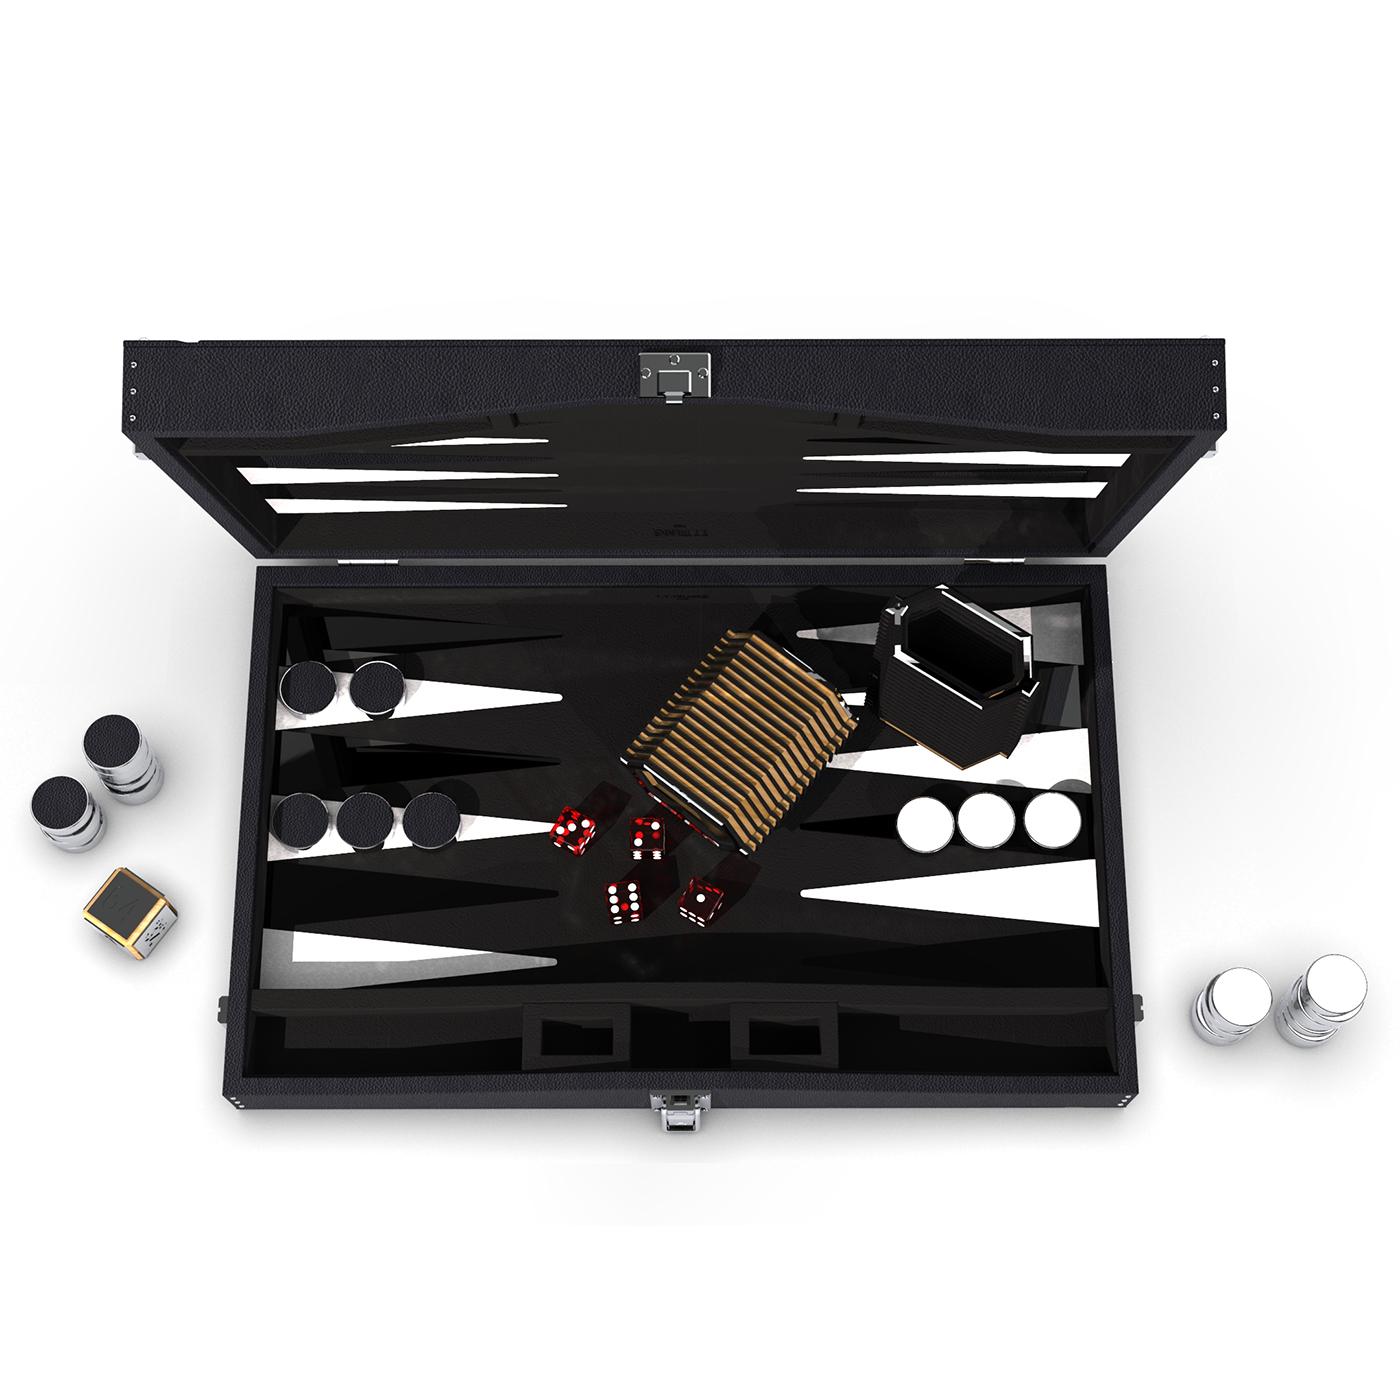 Backgammon Sober Night with genuine grained black leather and
with upholstered padding and lining in dinamica microfiber, black 
nickel playing tips and white leather.
With details in solid polished brass in nickel-plated. Bottom feet in
solid